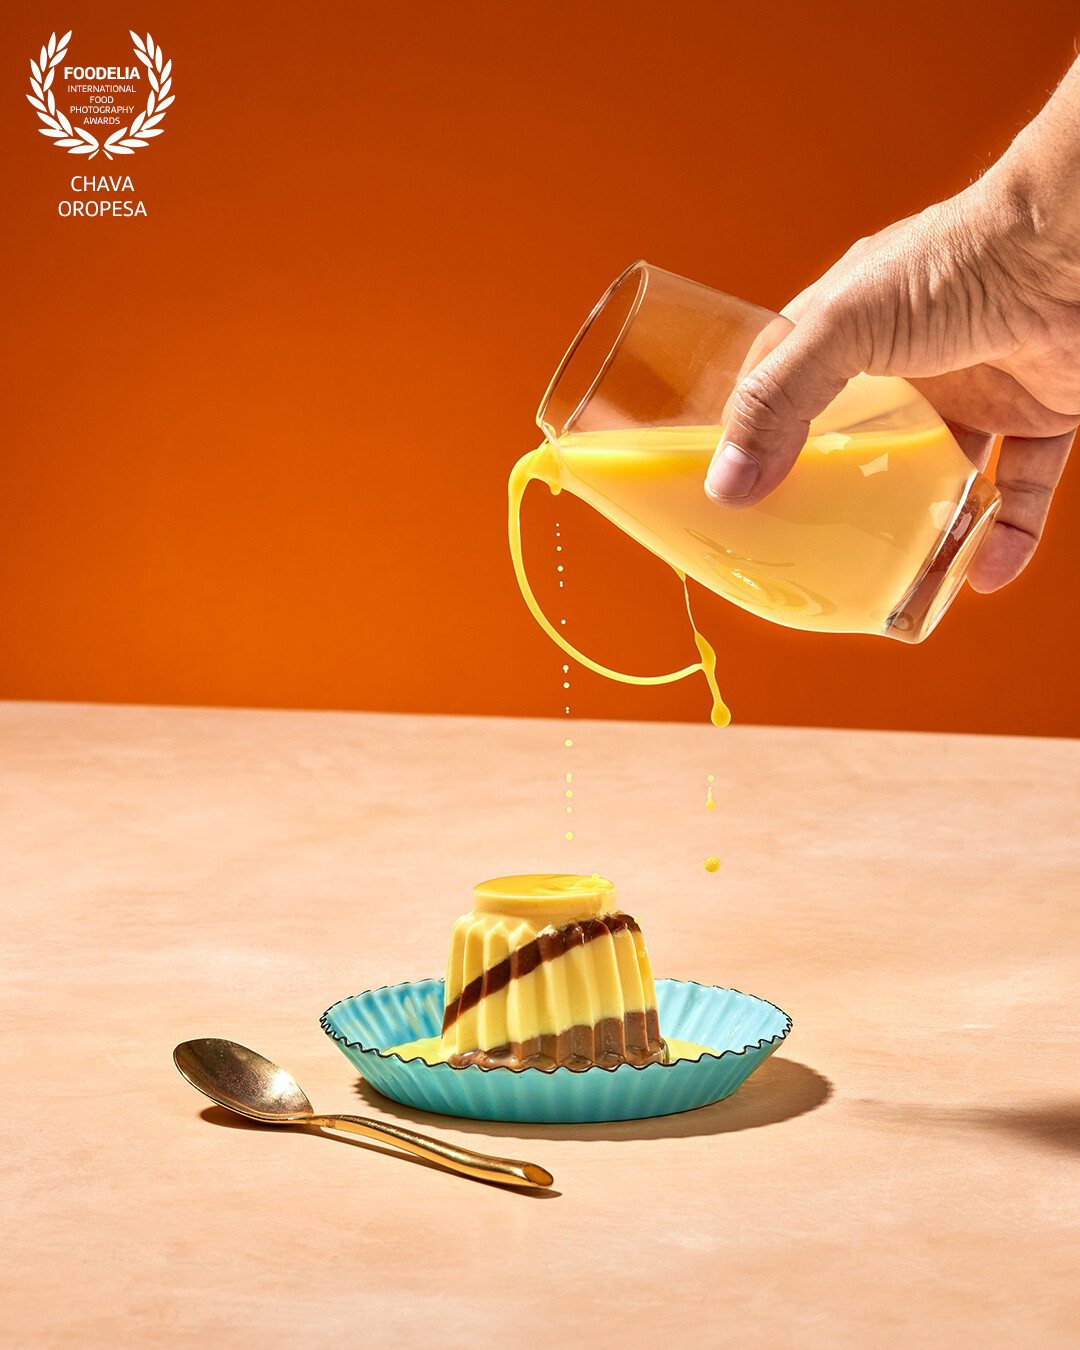 Personal work for my ongoing project "Con Mucho Cariño", a collection of my mother's recipes. Pictured is Rompope Jello. Check my website to see the shoot and the recipe.